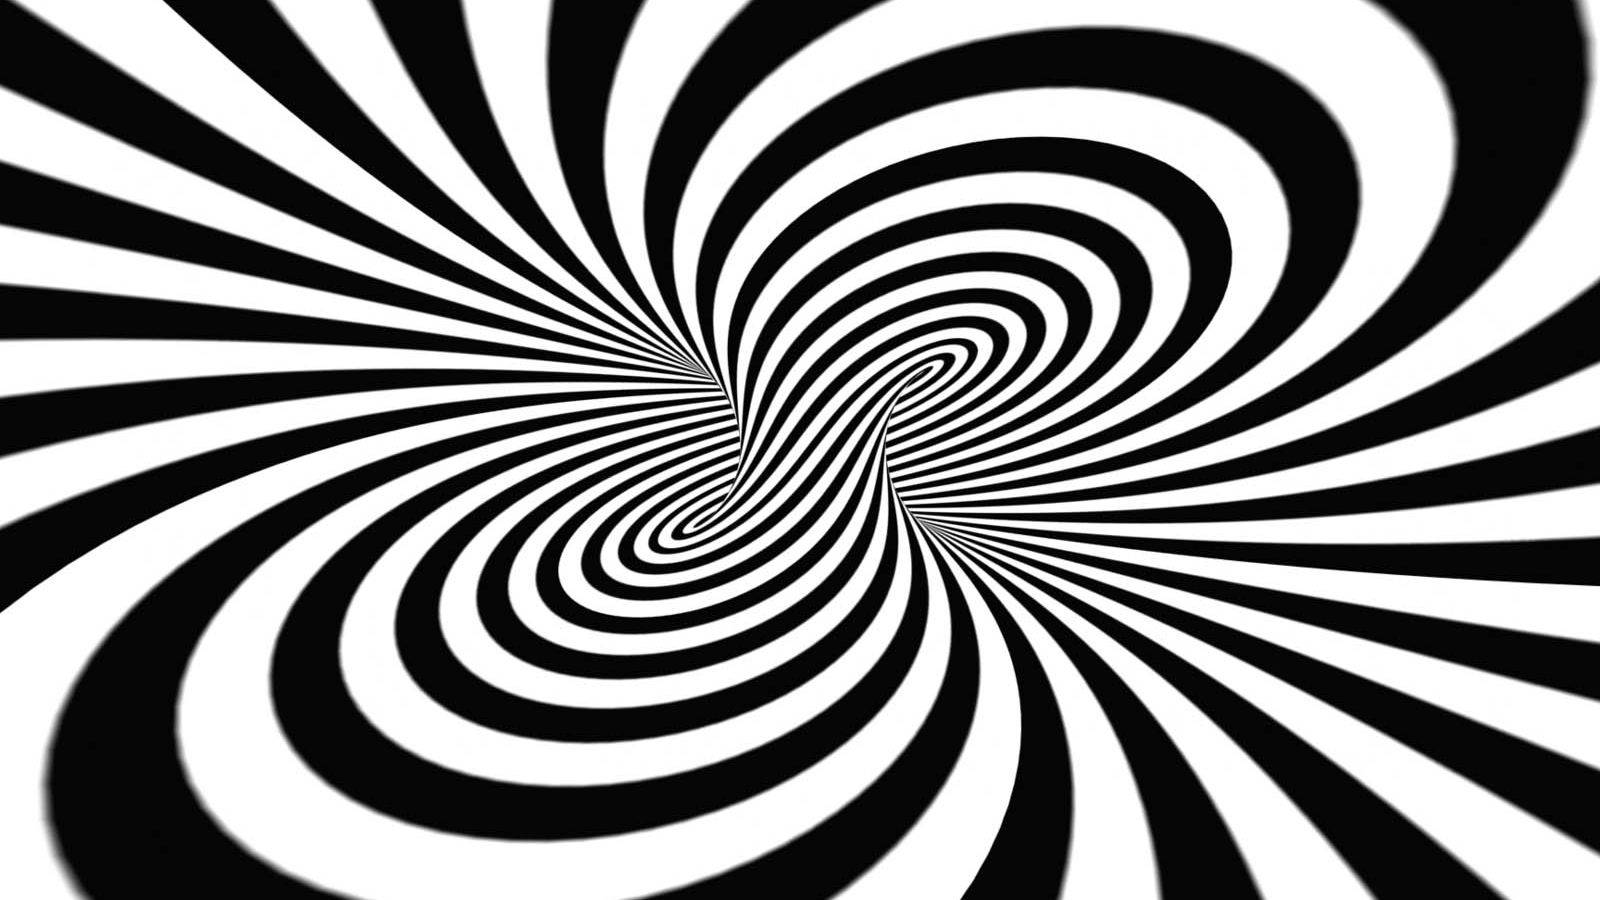 Spiral Illusion Art 3d Android Phone Wallpaper